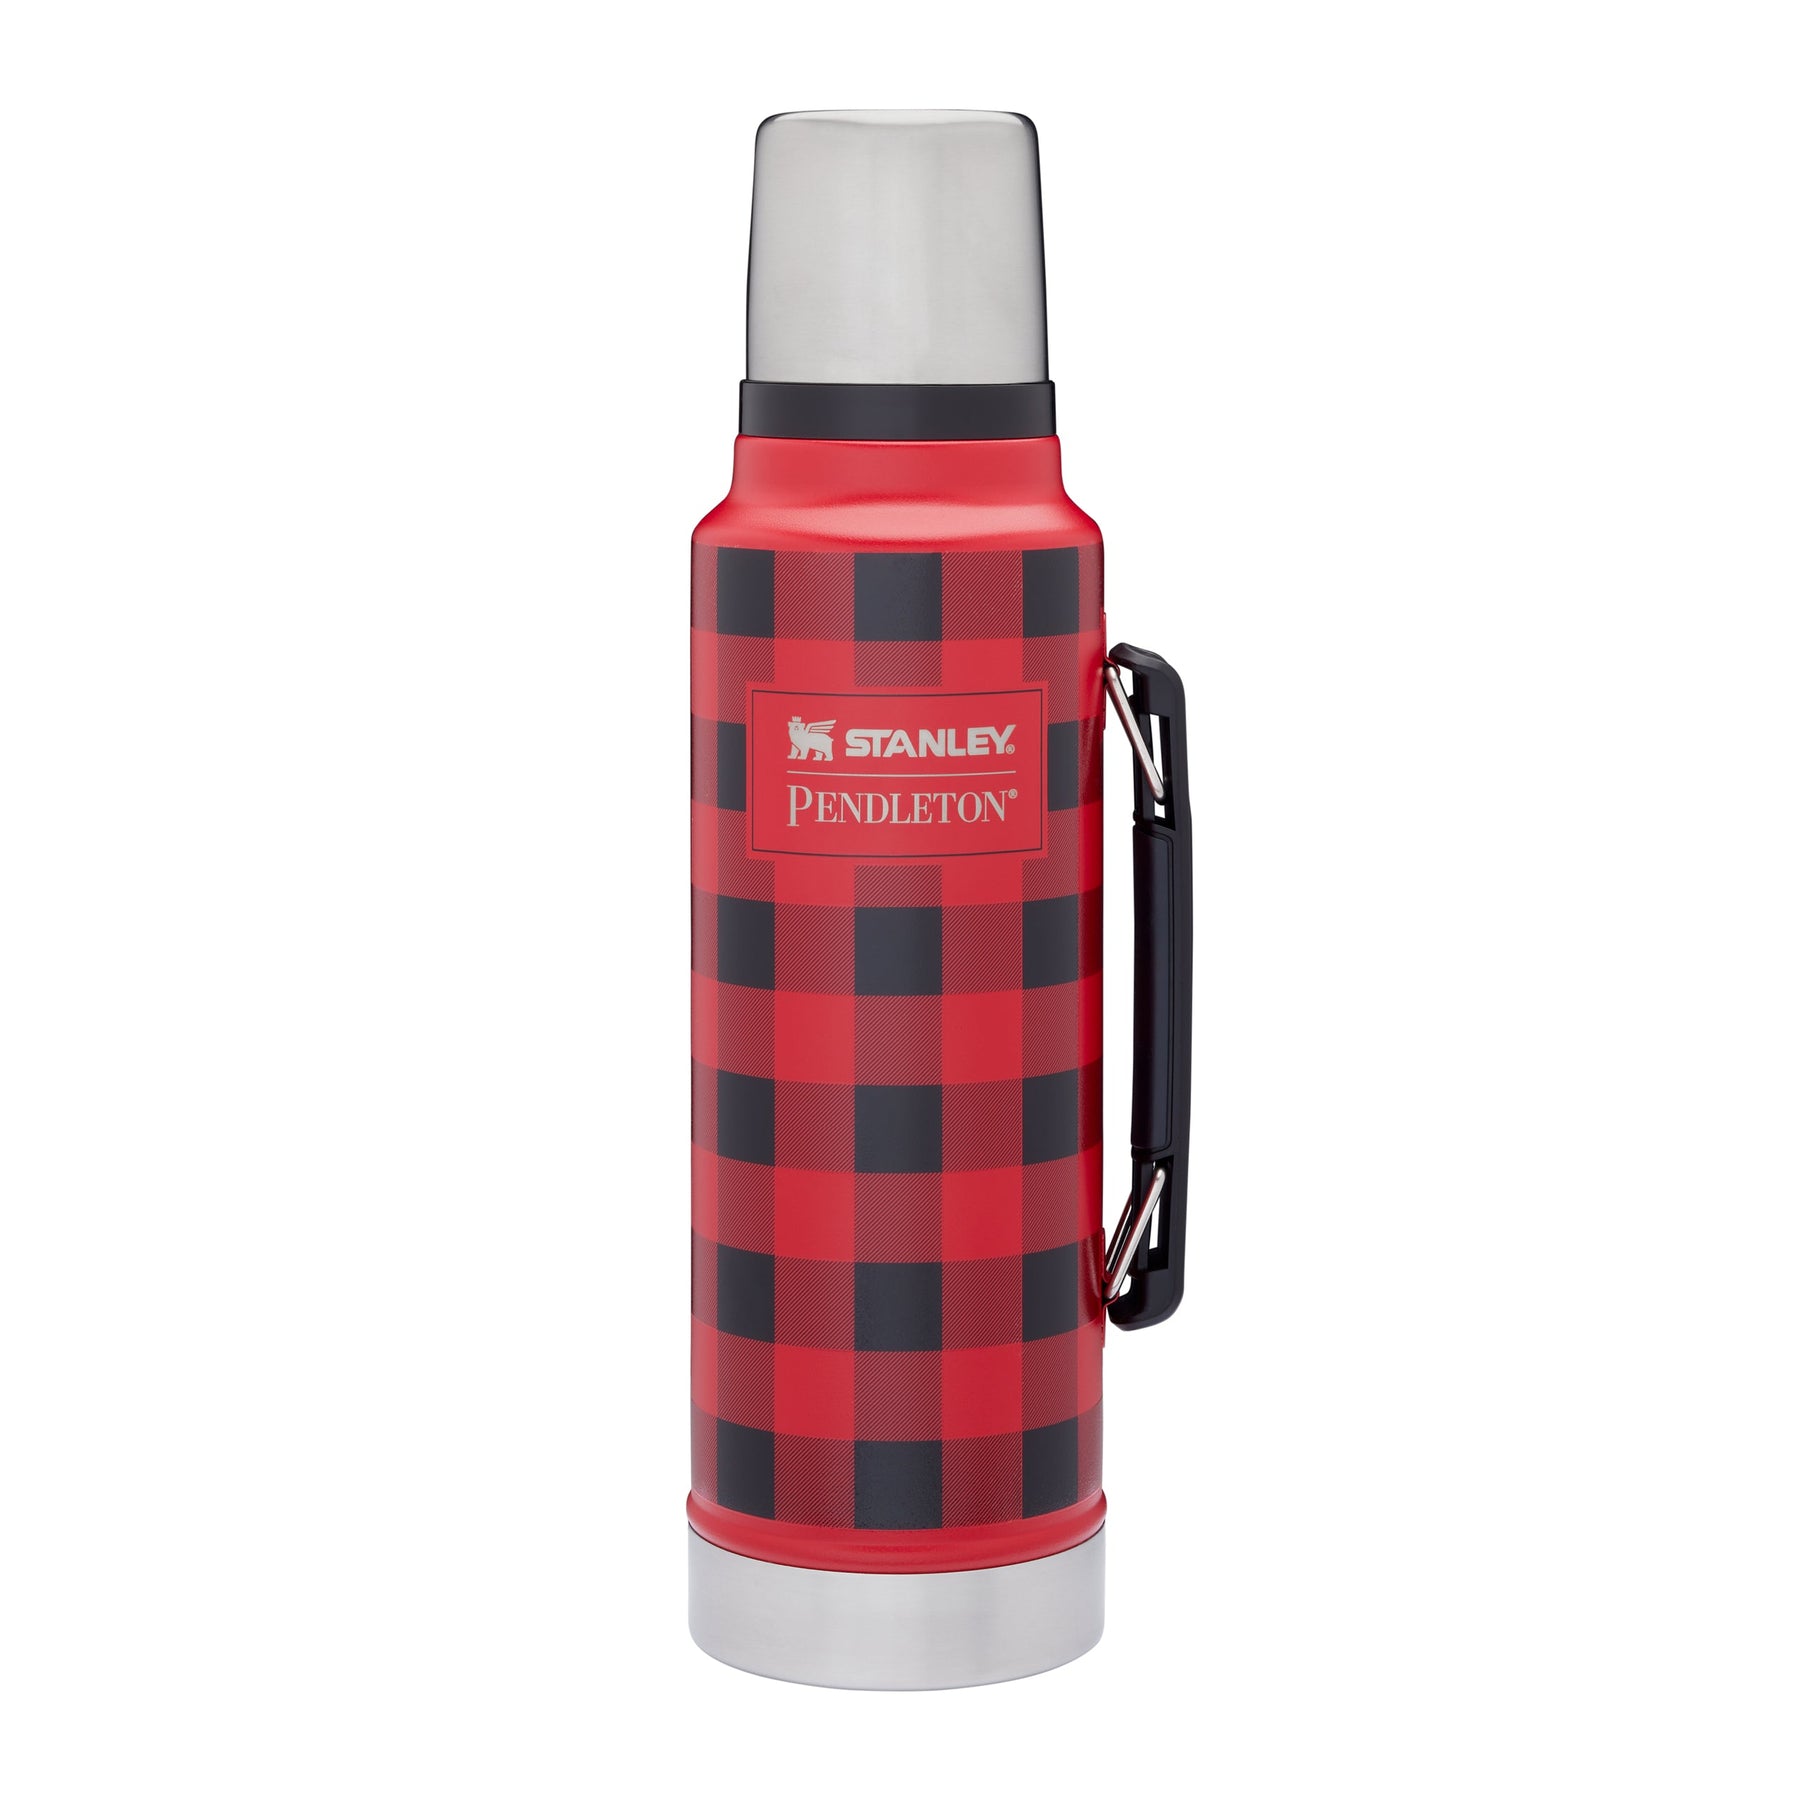 https://cdn.shopify.com/s/files/1/0516/4564/5000/products/StanleyXPendleton-TheLegendaryClassicBottle1.4L-1.5QT-BuffaloCheckRed-FrontView_1800x1800.jpg?v=1699055794